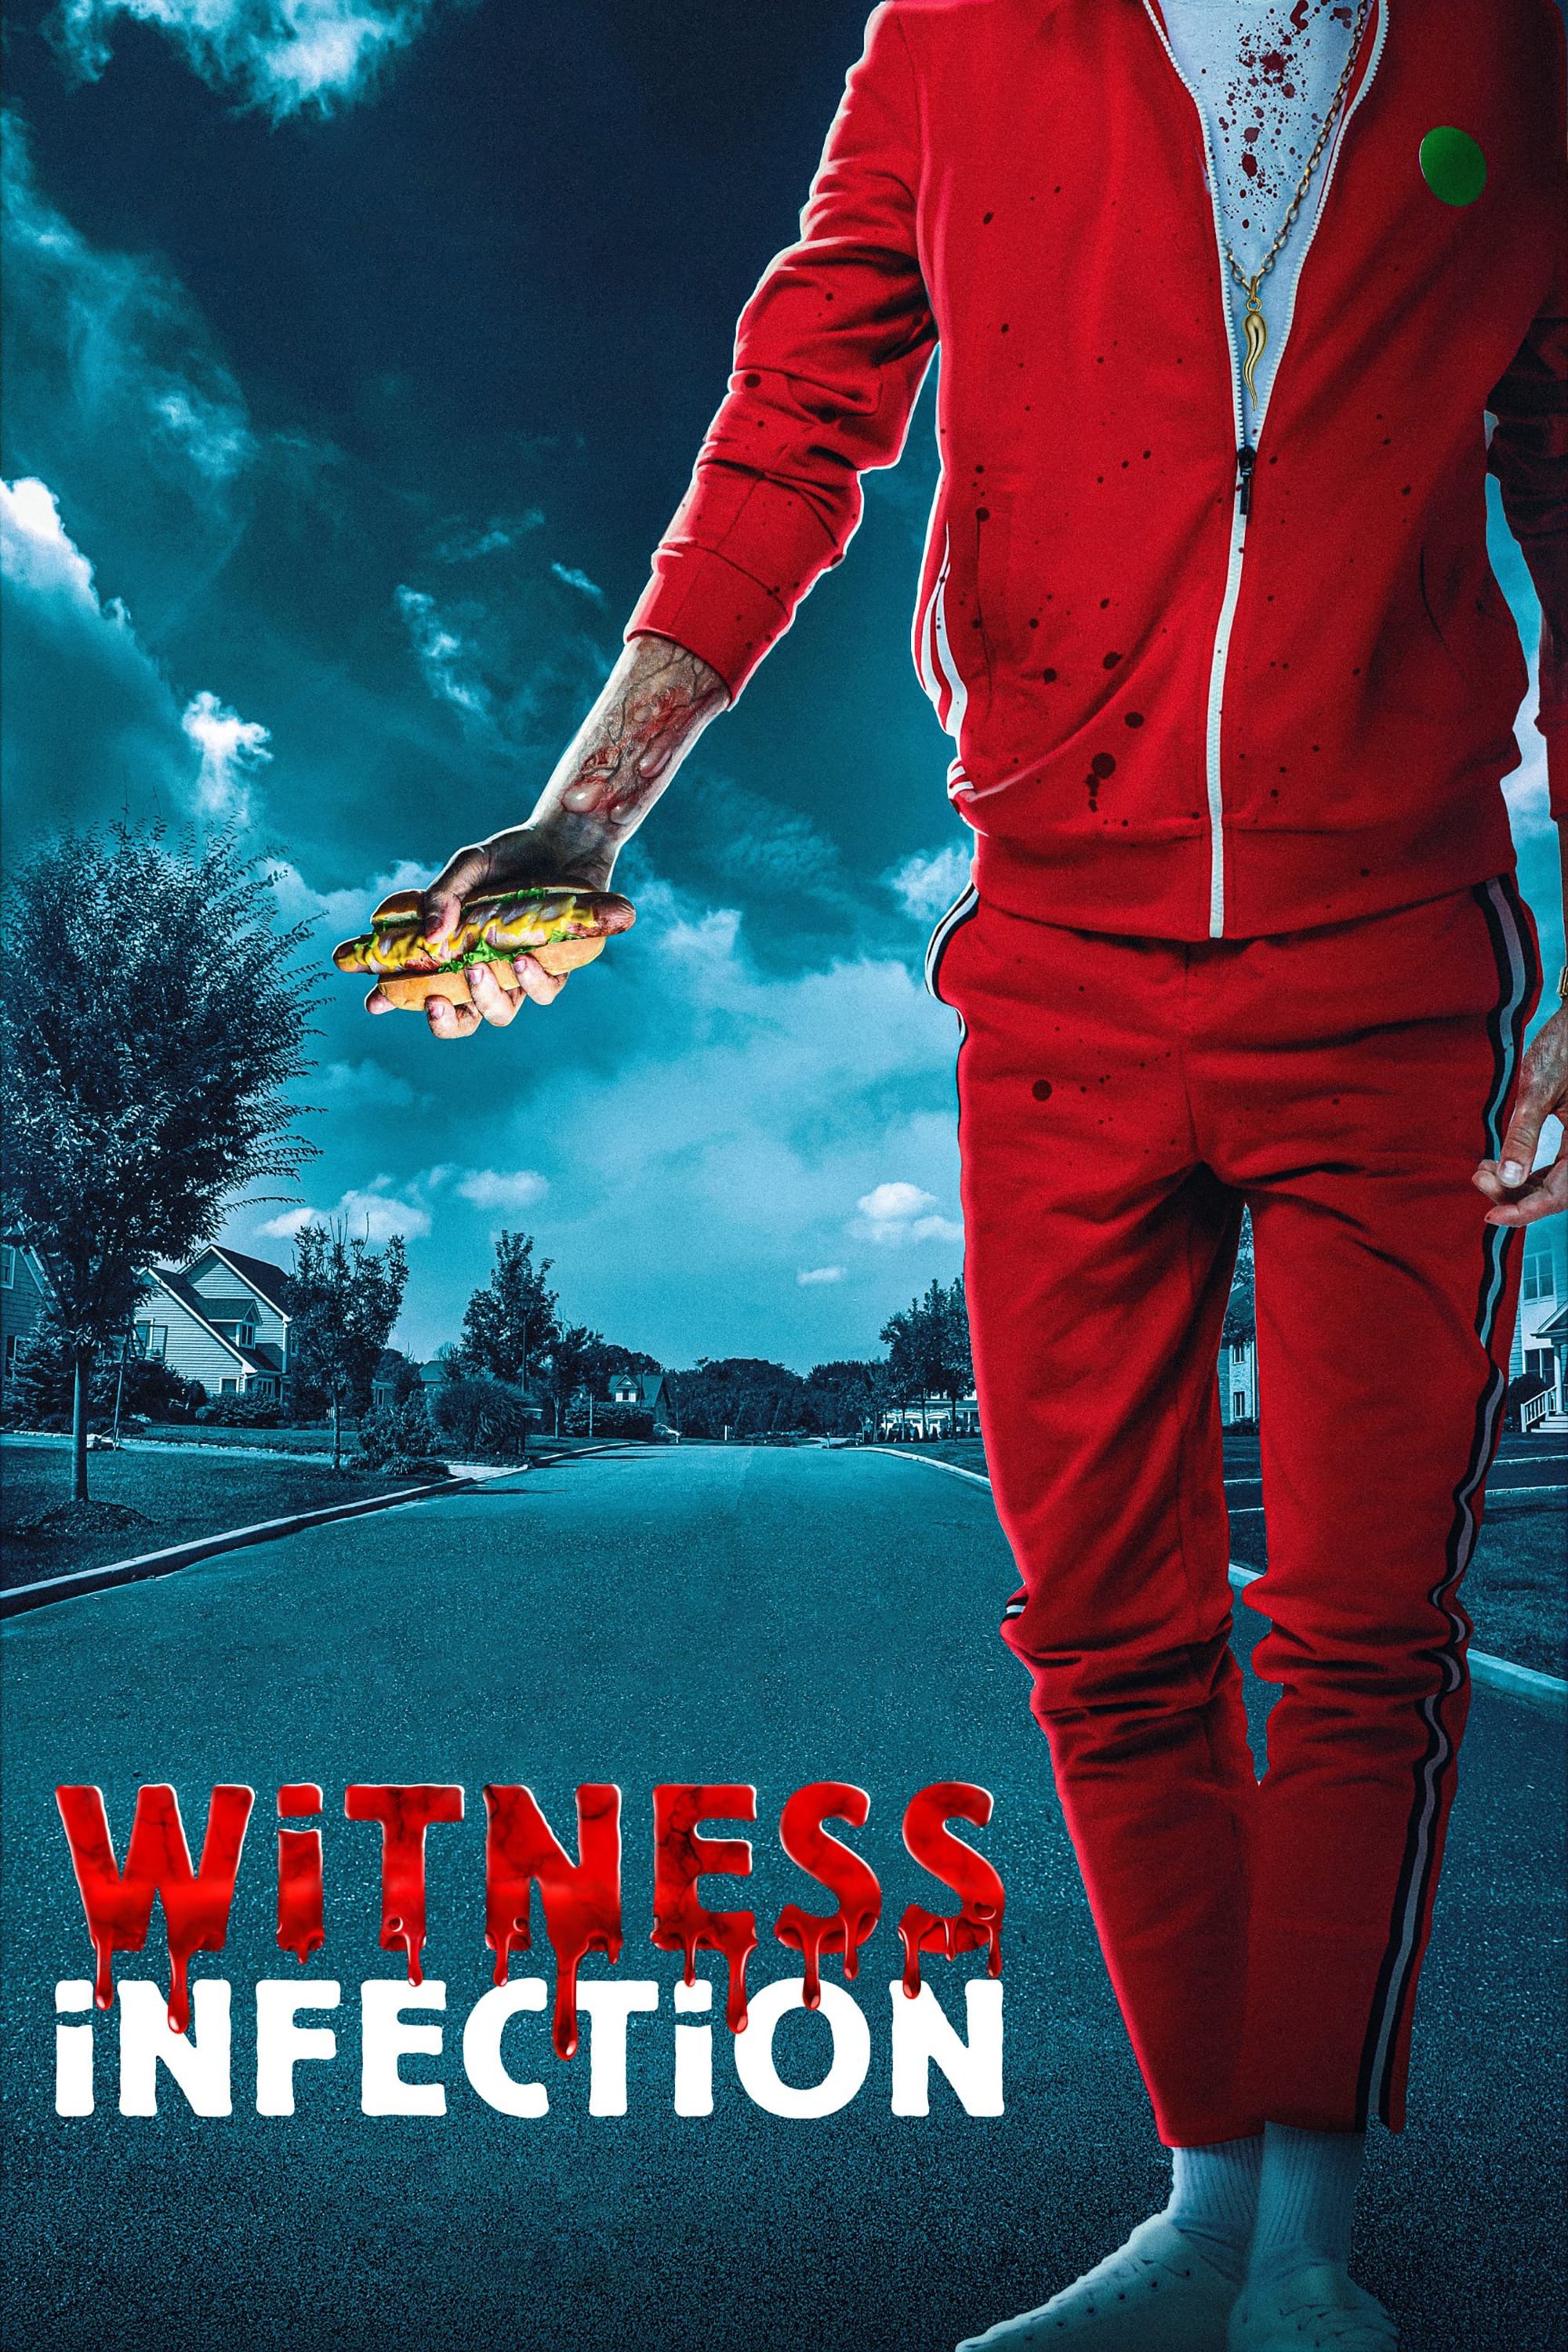 Witness Infection film